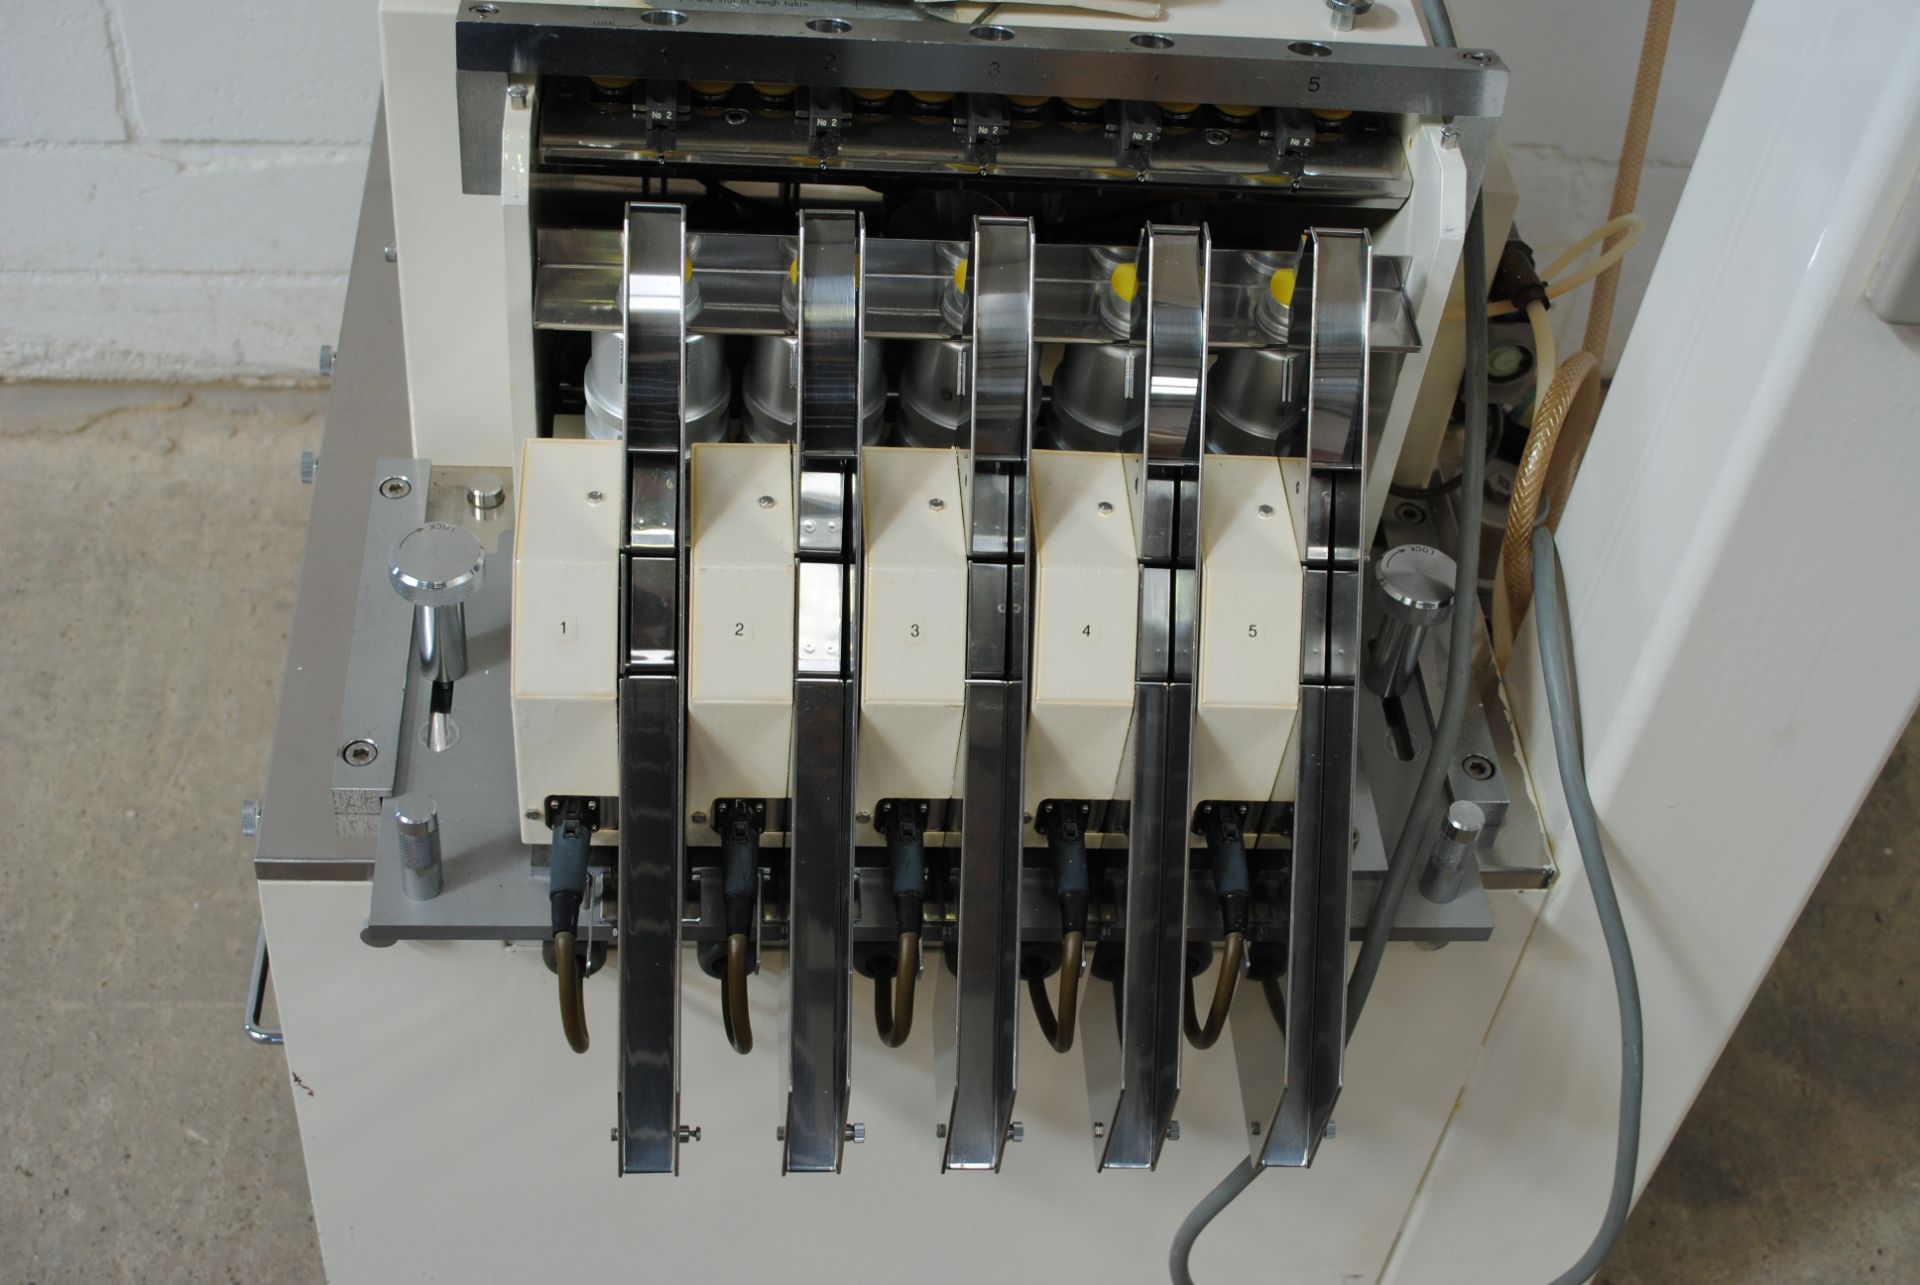 Aniritsu Capsule / Tablet Checkweigher Model: K51 5D with K261d Data Recorder S/N:A306 Year: 21/2/ - Image 8 of 8